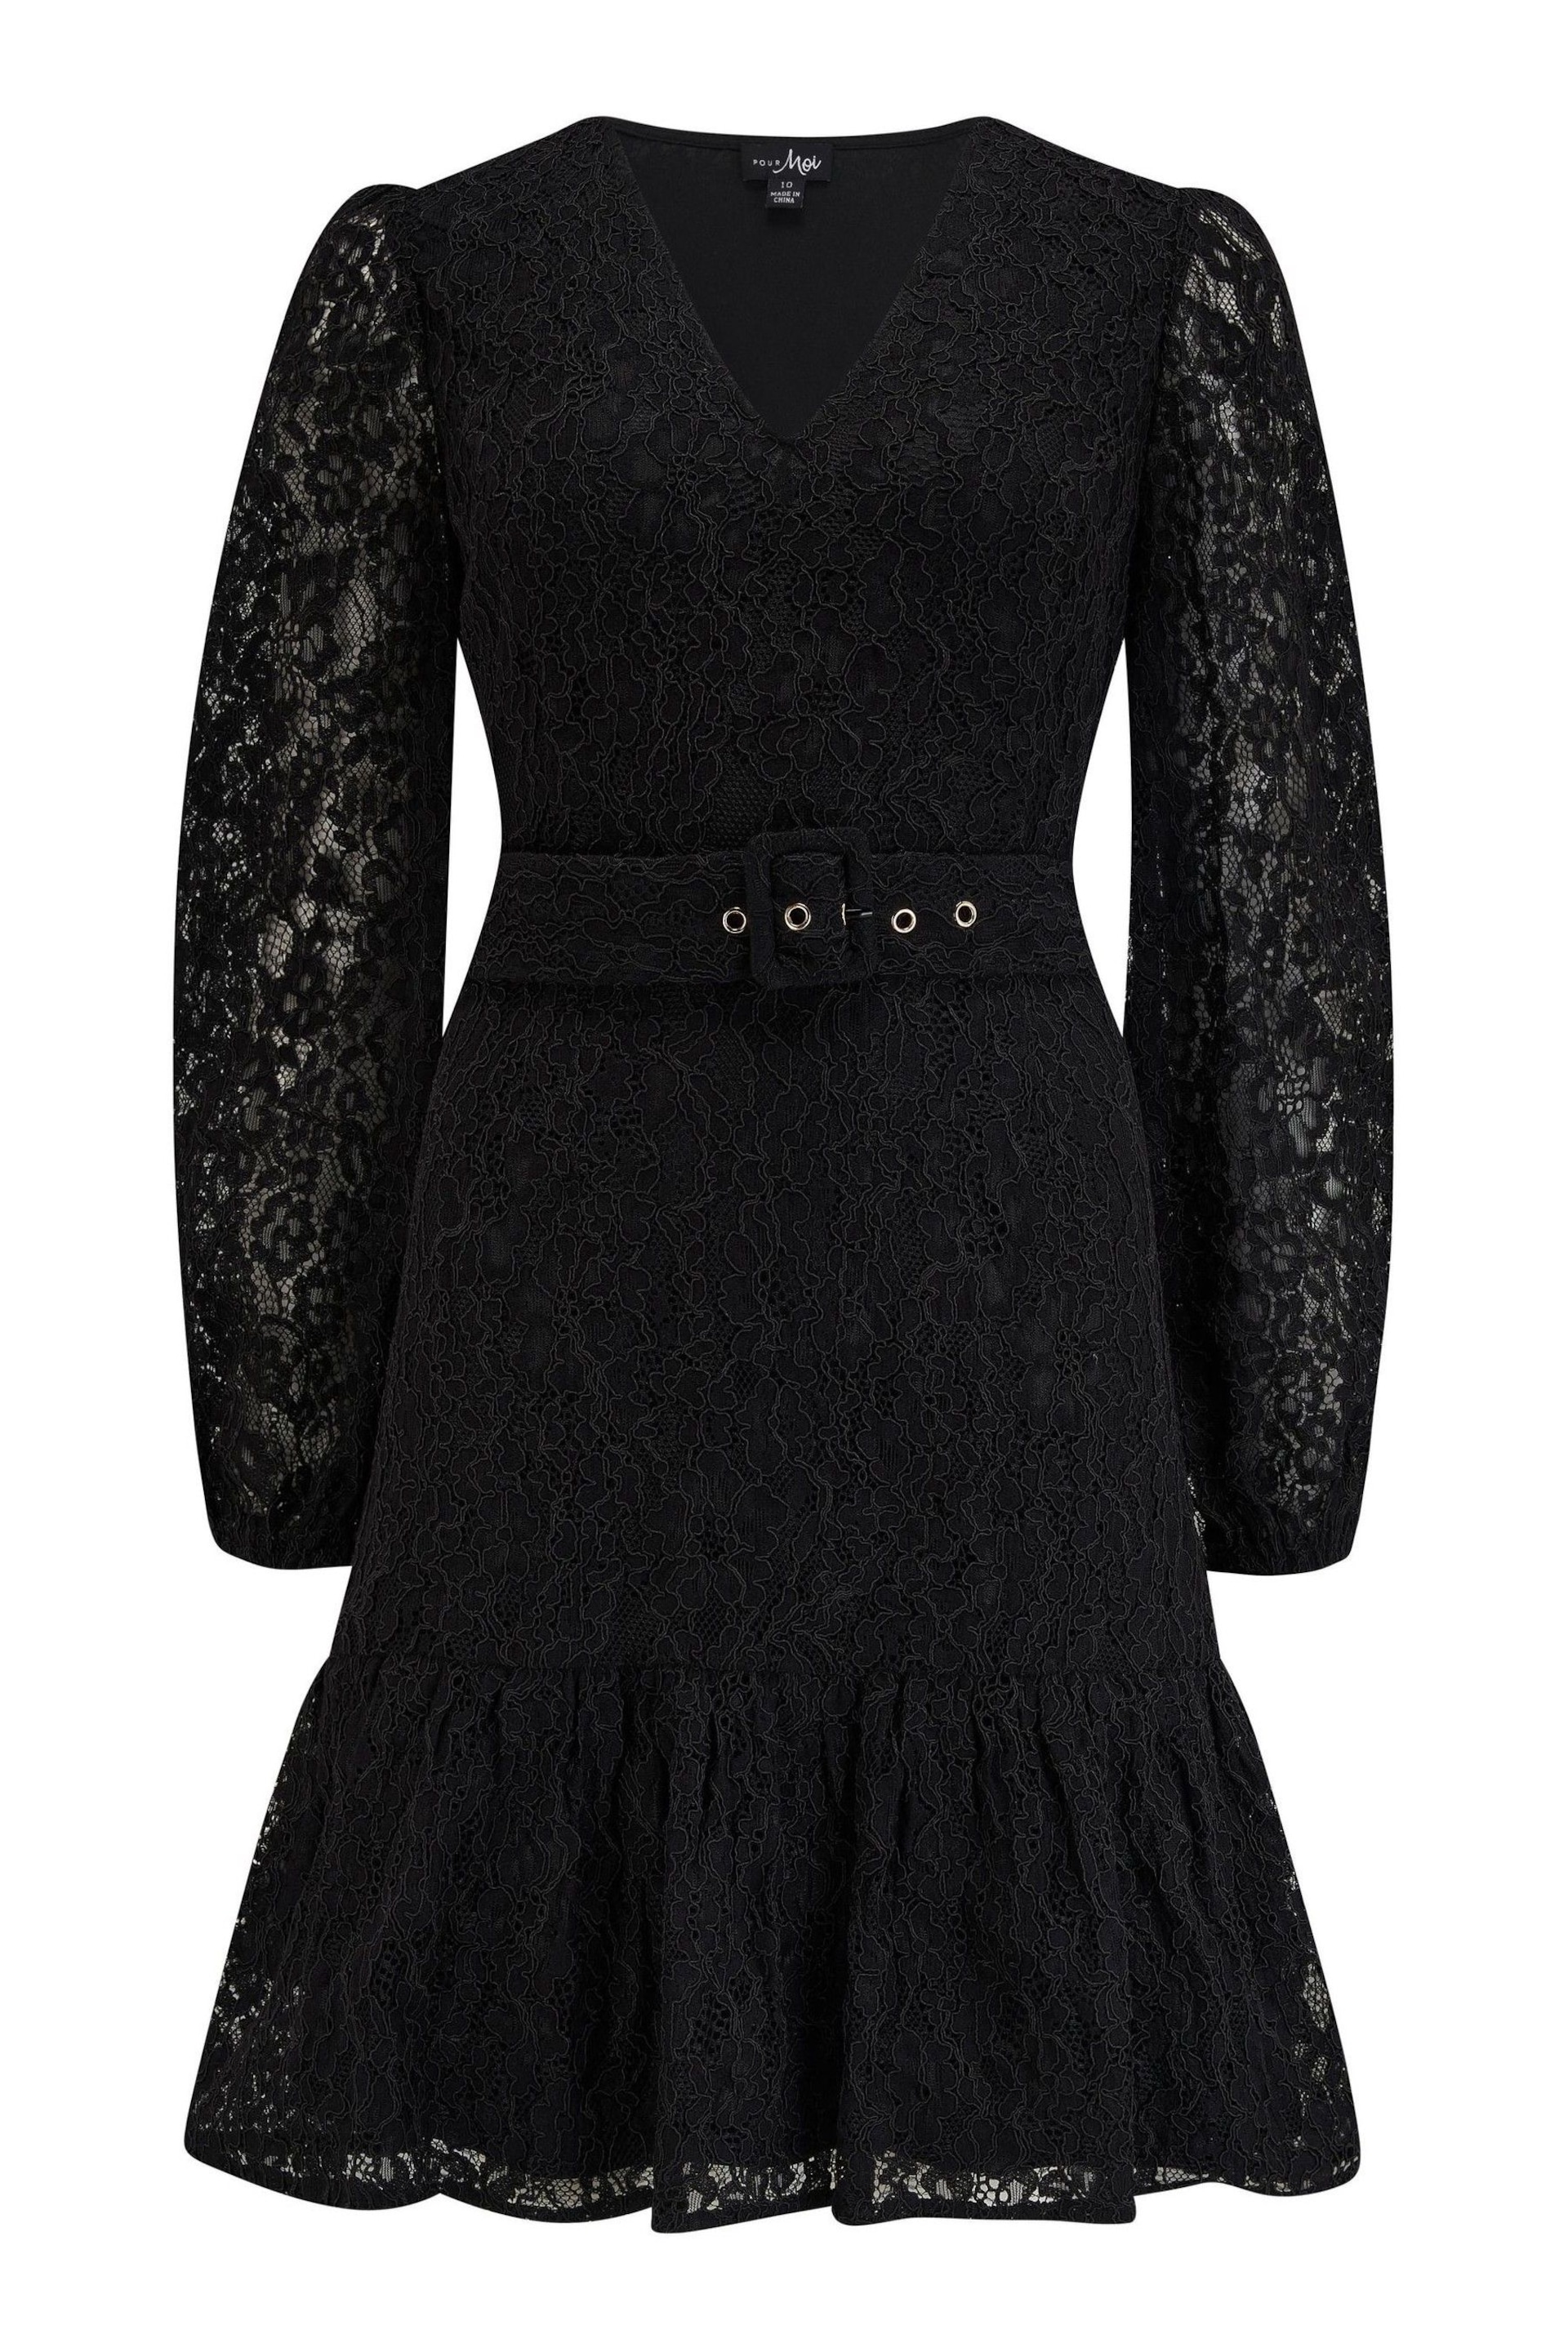 Pour Moi Black Corded Lace Fitted Lorena Dress with Belt - Image 3 of 4